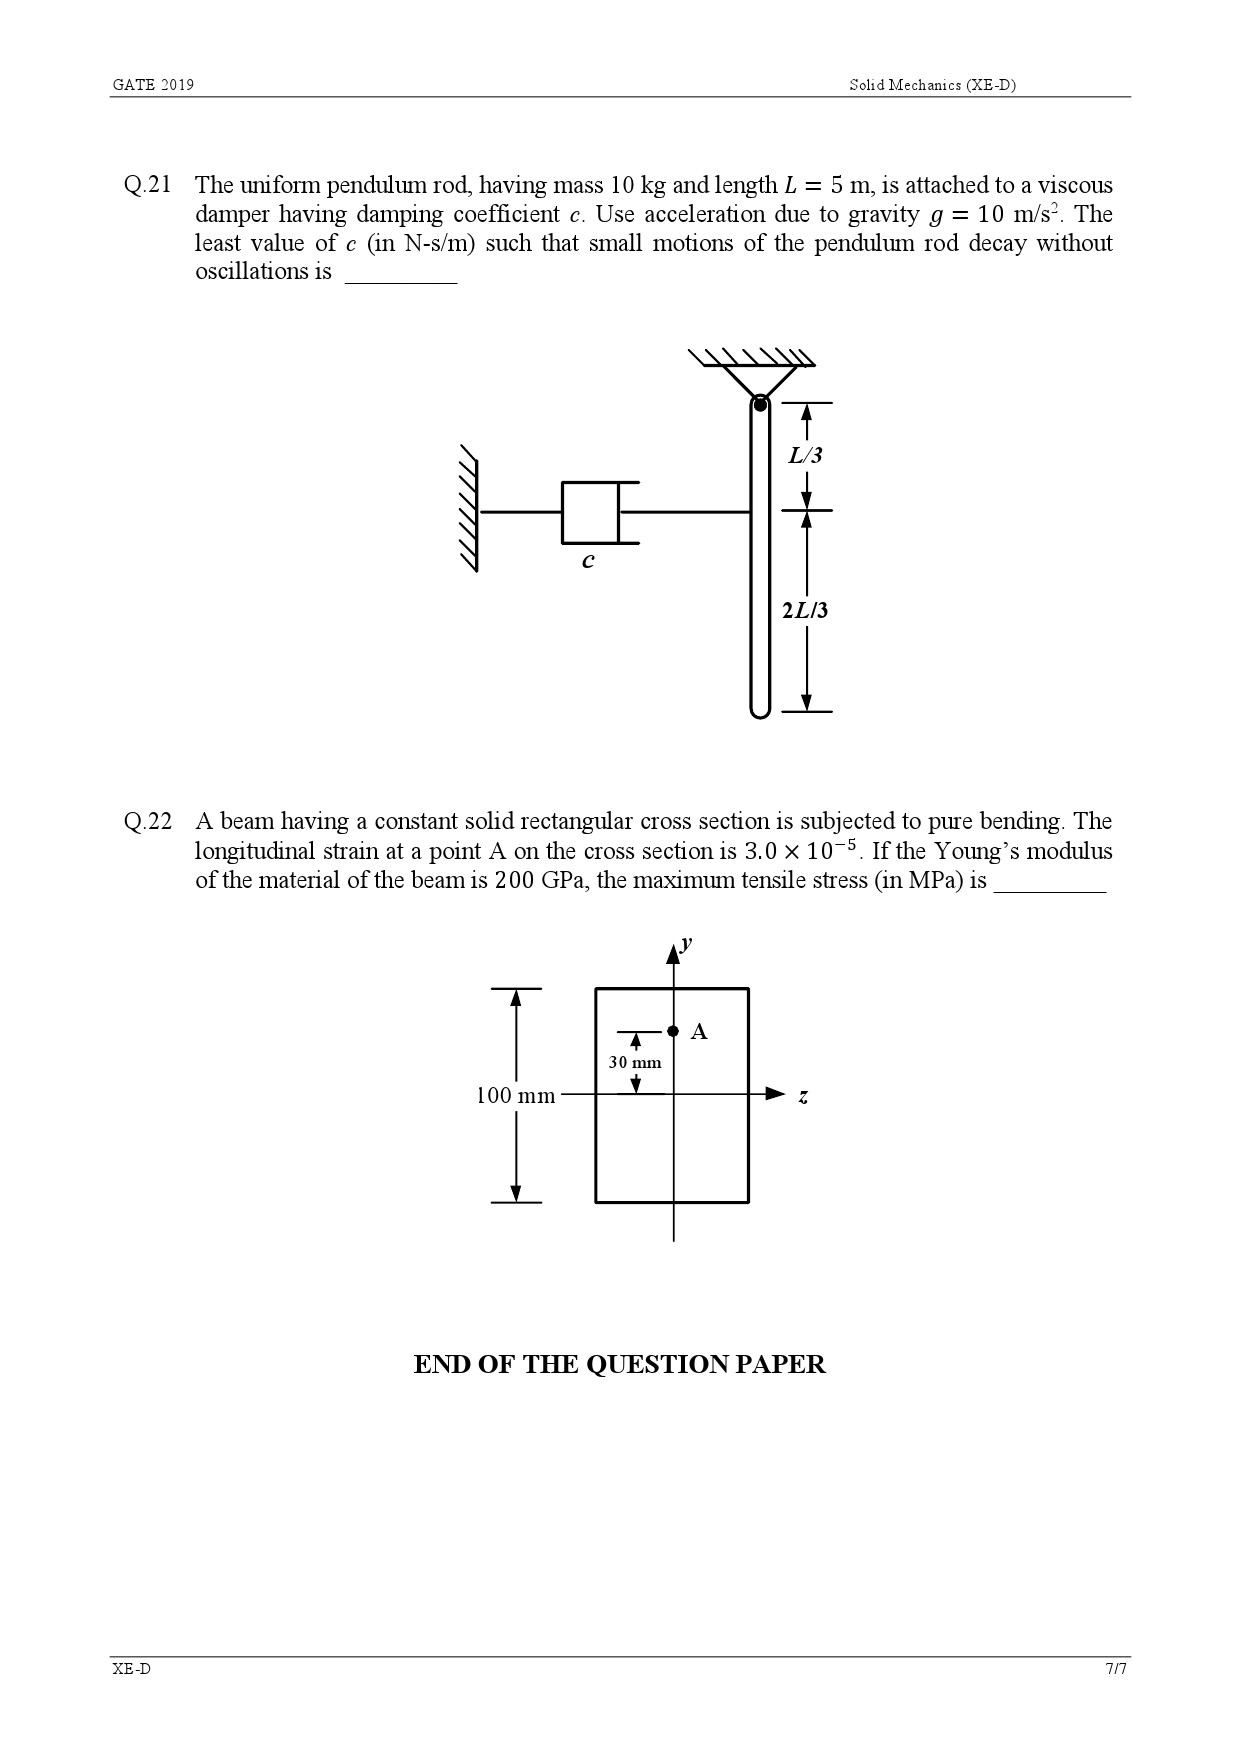 GATE Exam Question Paper 2019 Engineering Sciences 22